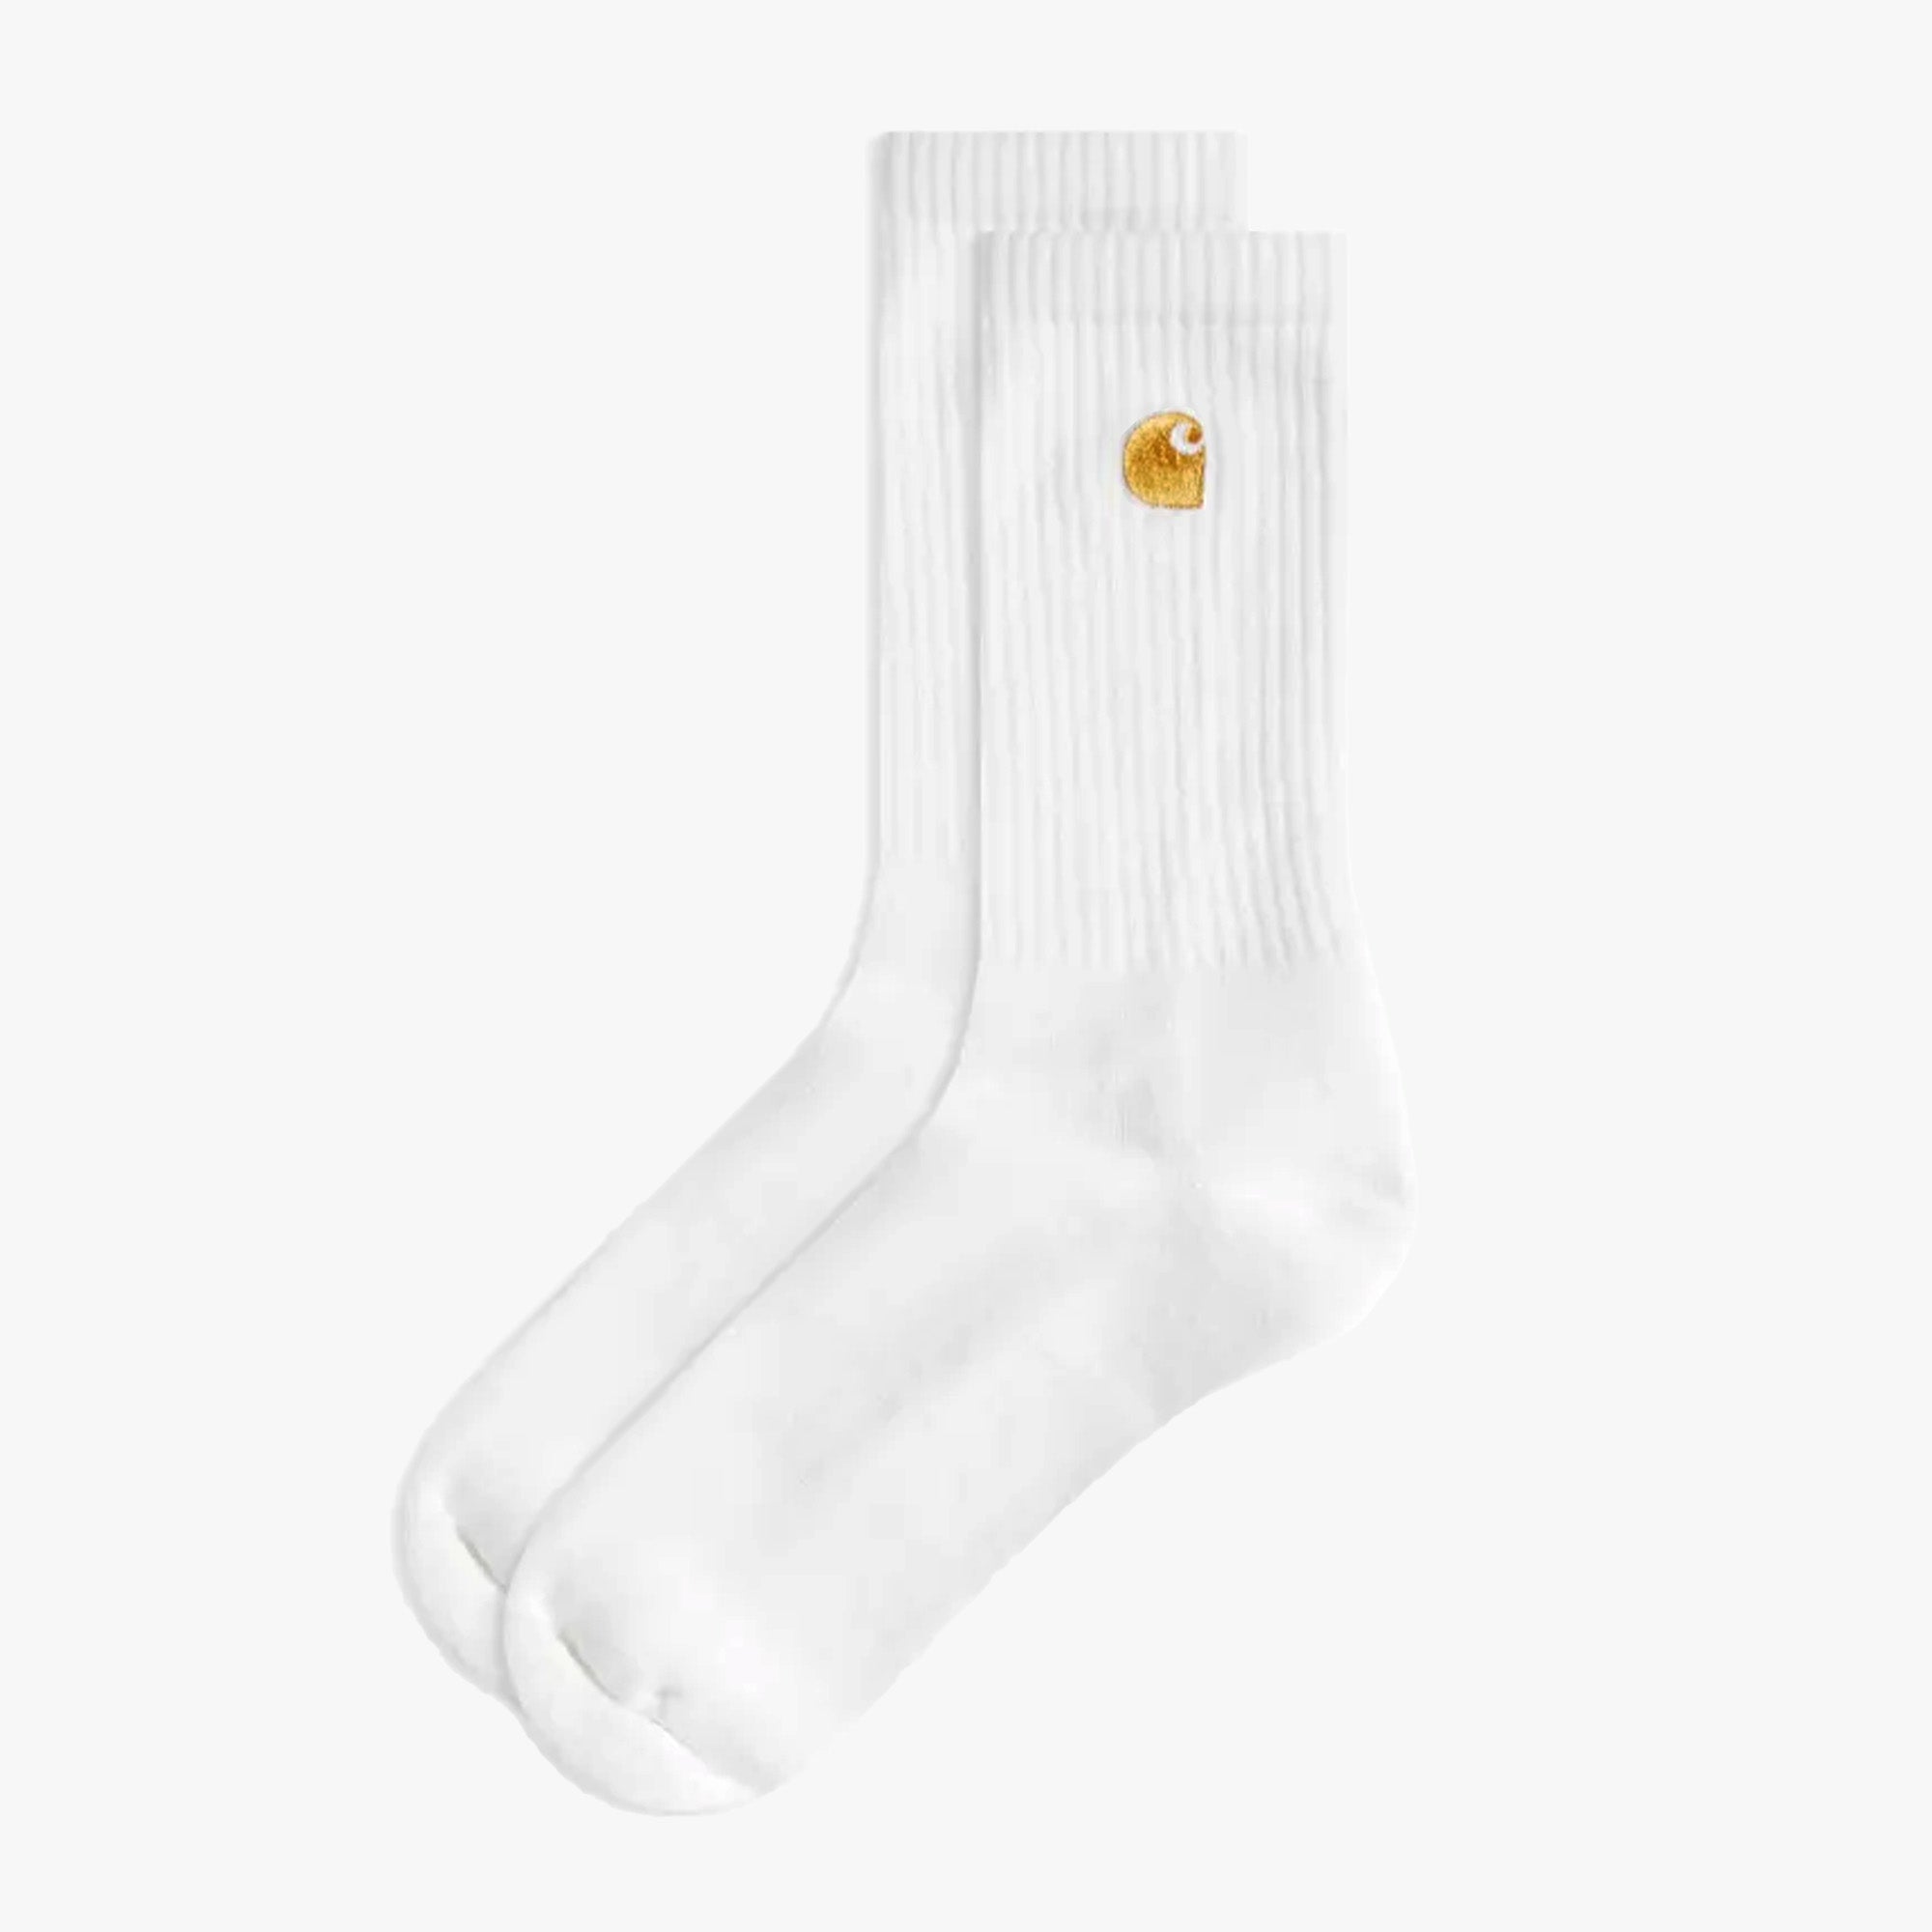 Chaussettes Carhartt WIP Chase blanches / dorées 1